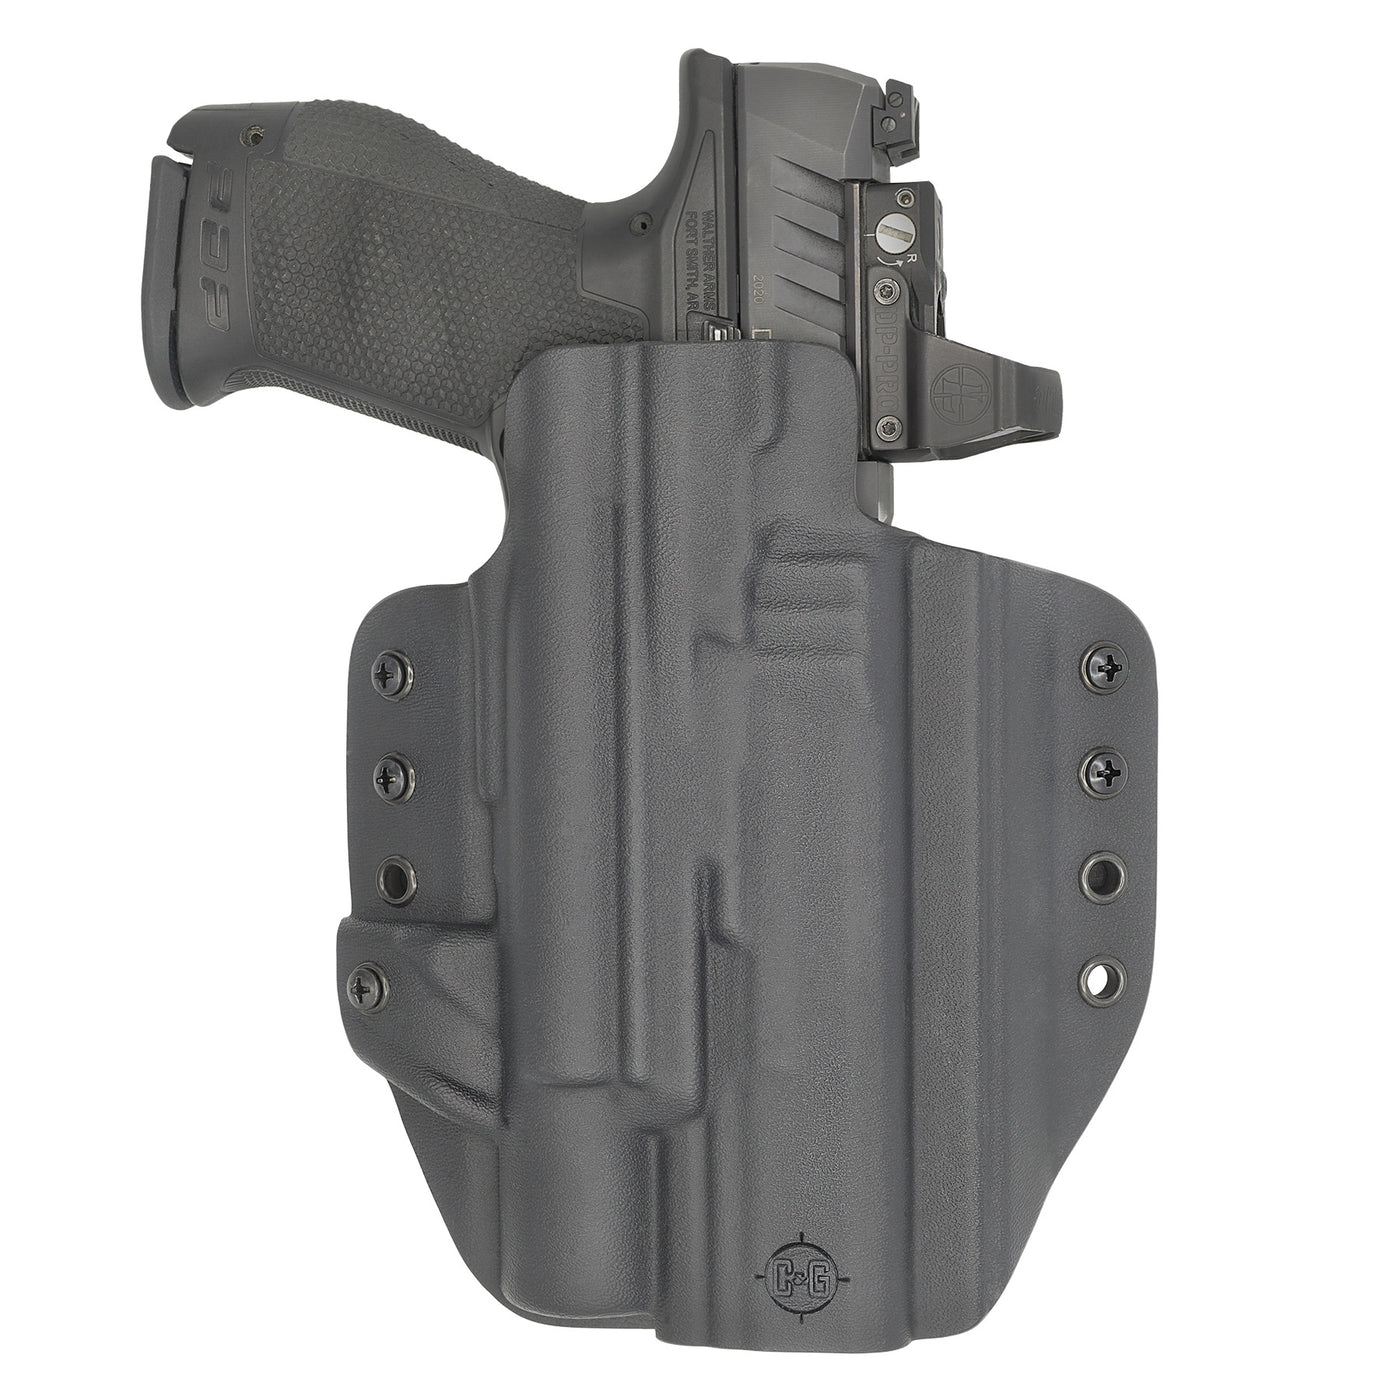 C&G Holsters quickship OWB Tactical Beretta Surefire X300 in holstered position